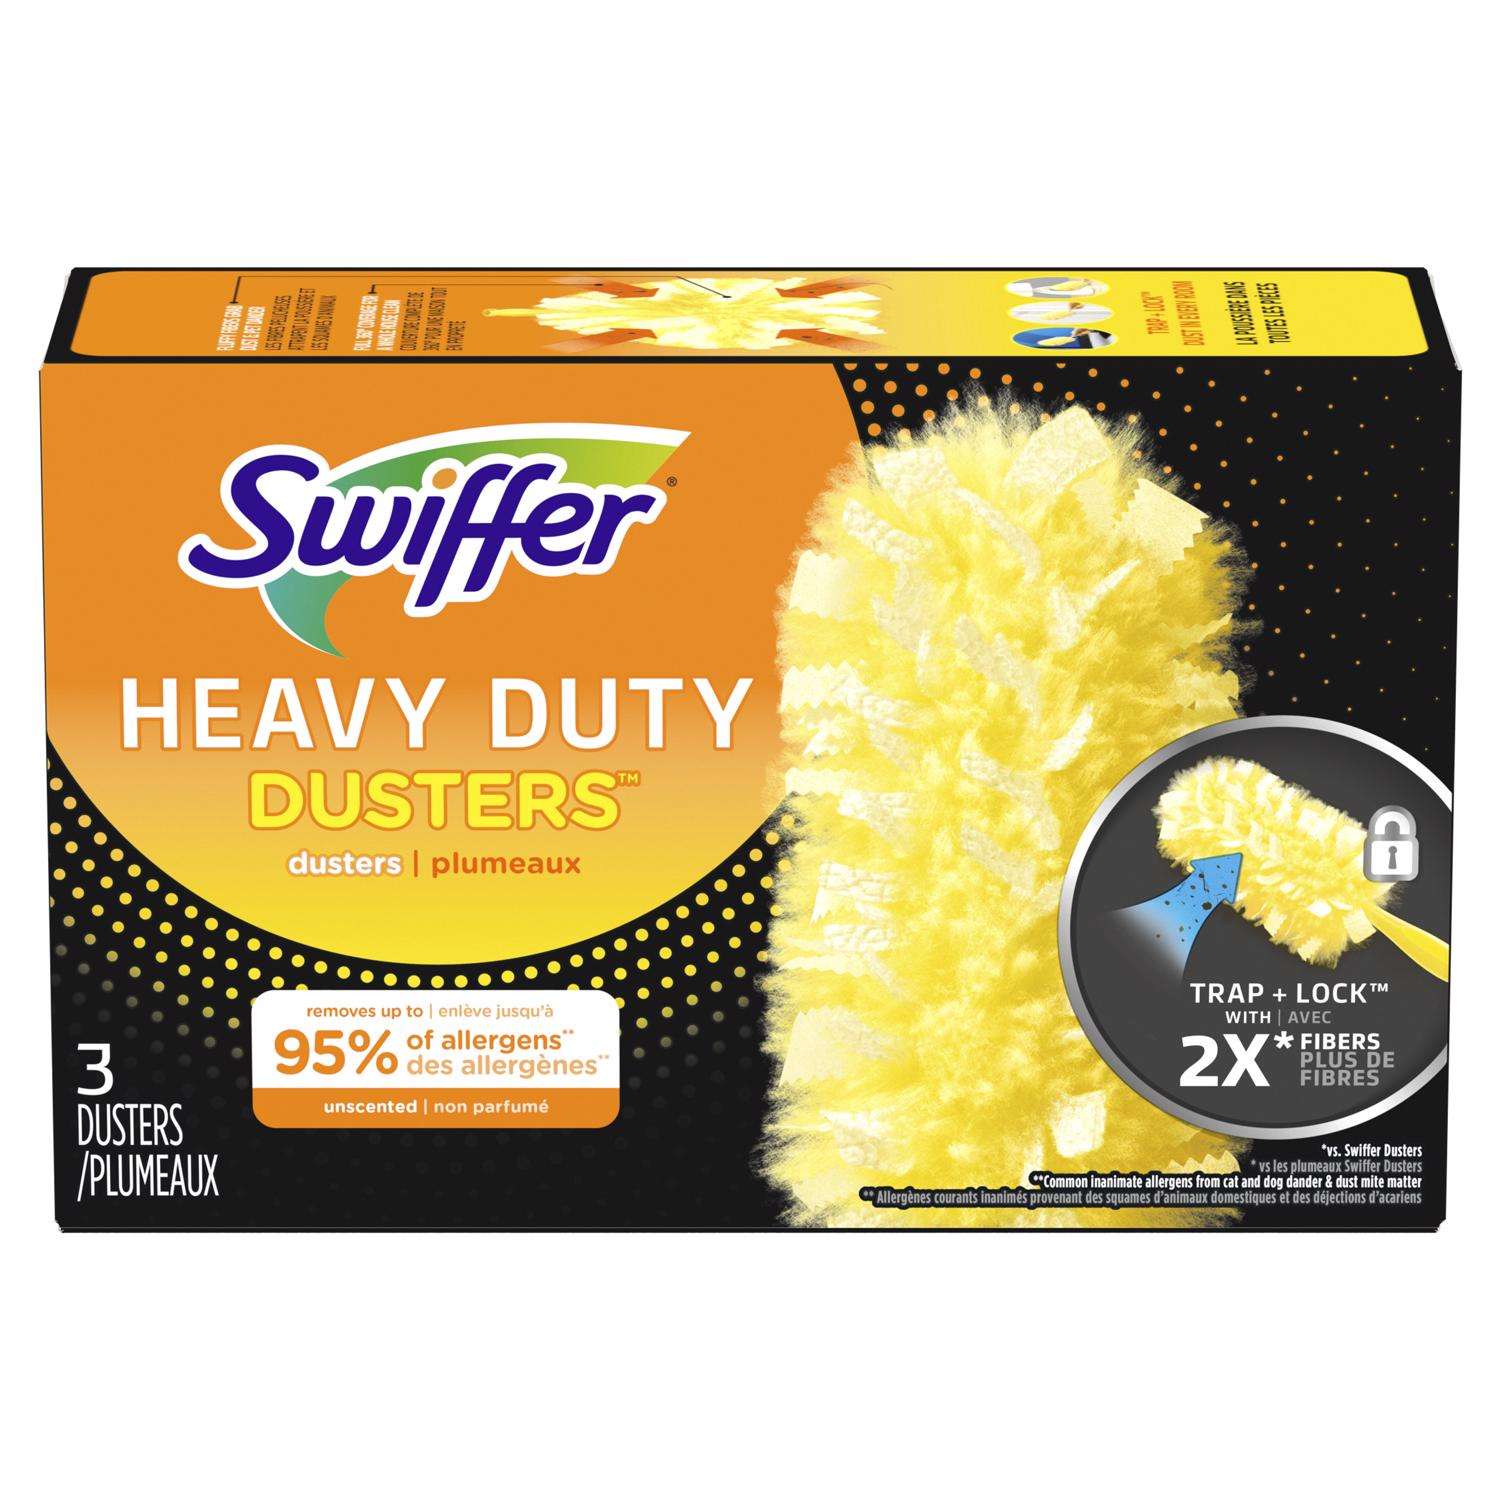 Quality Chemical Company - Swiffer 360 Degree Duster refill